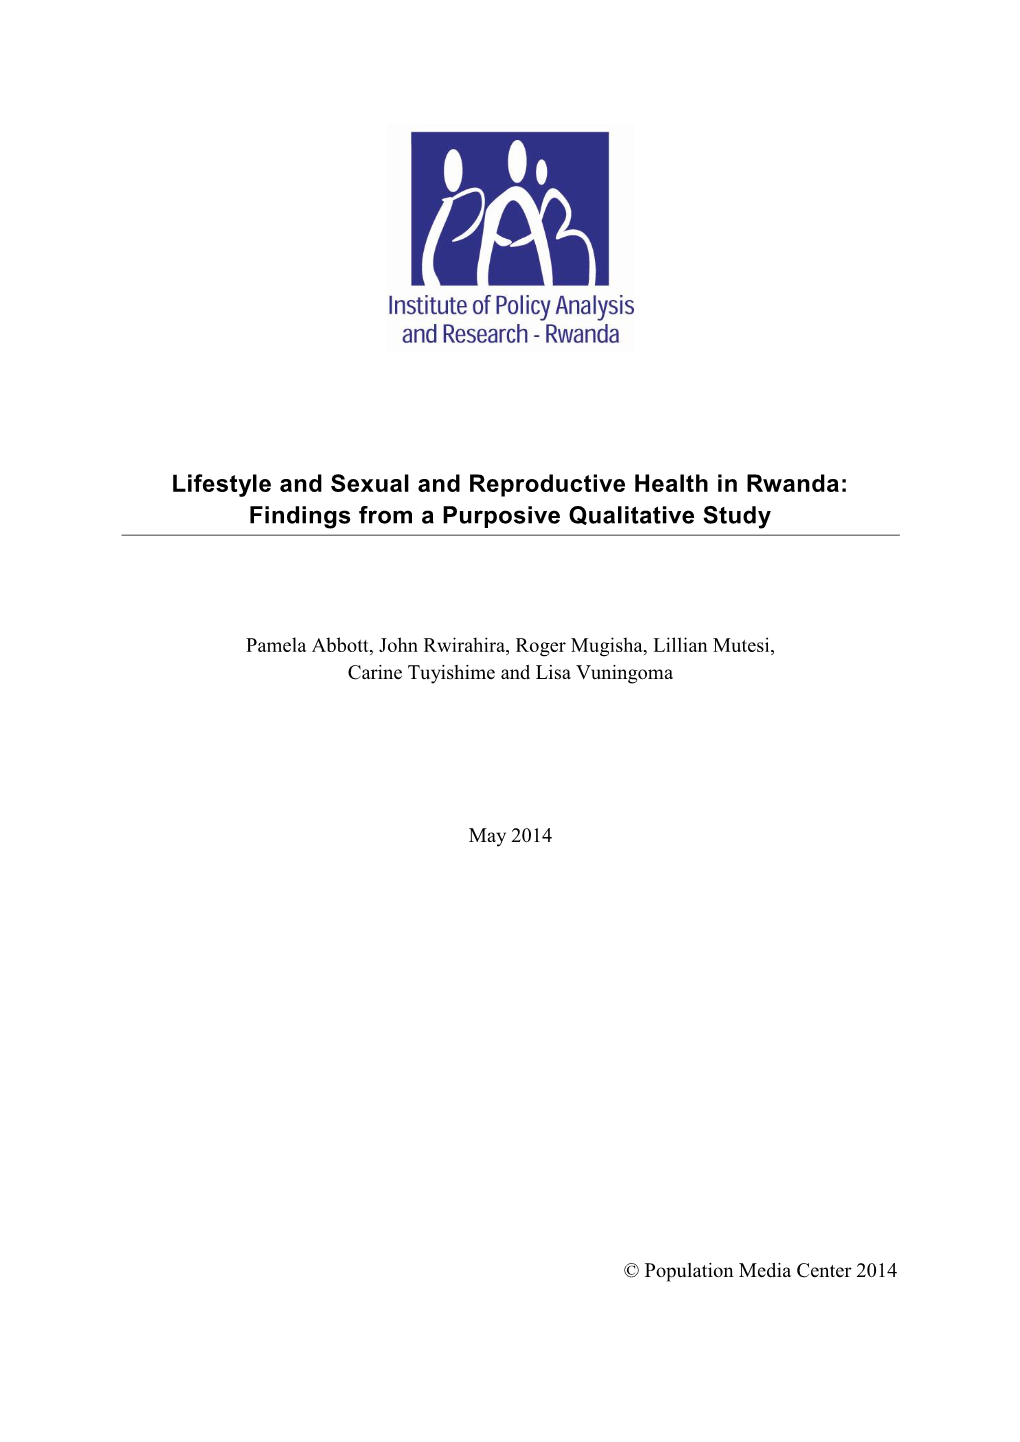 Lifestyle and Sexual and Reproductive Health in Rwanda: Findings from a Purposive Qualitative Study